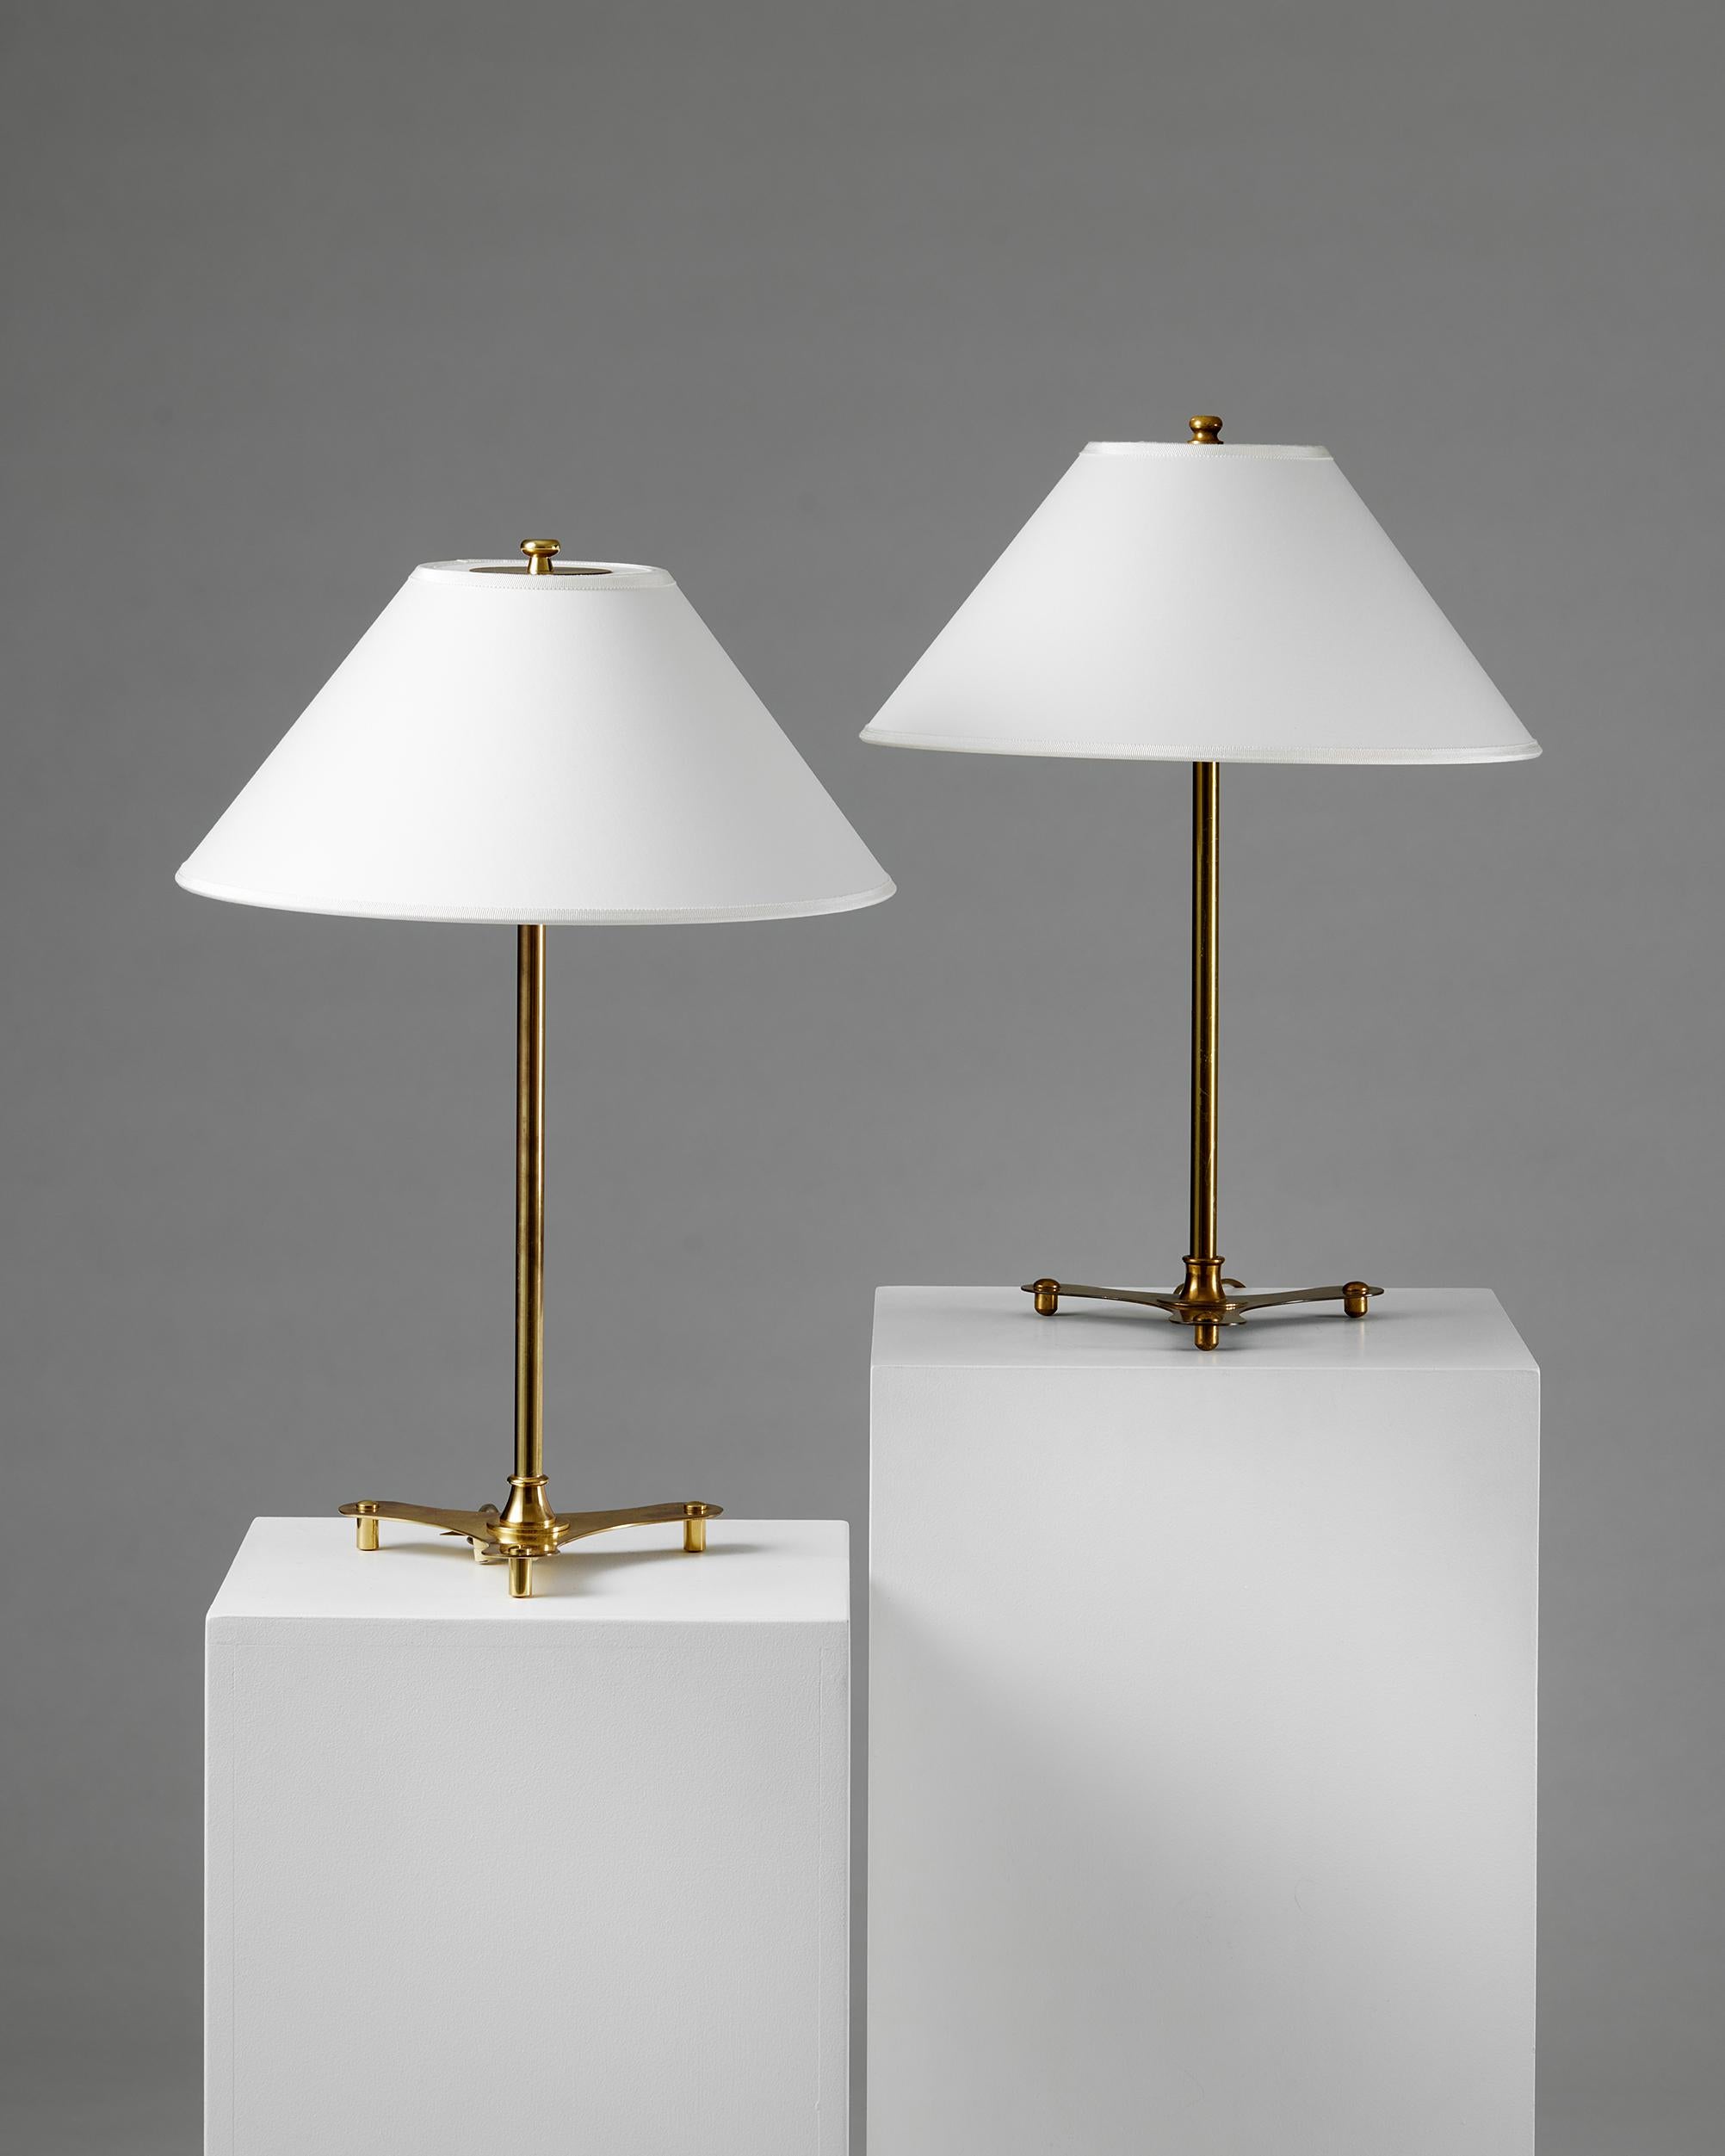 Pair of table lamps model 2552 designed by Josef Frank for Svenskt Tenn, Sweden, 1950s

Stamped.

Brass and textile.

Josef Frank was a true European, he was also a pioneer of what would become classic 20th century Swedish design and the